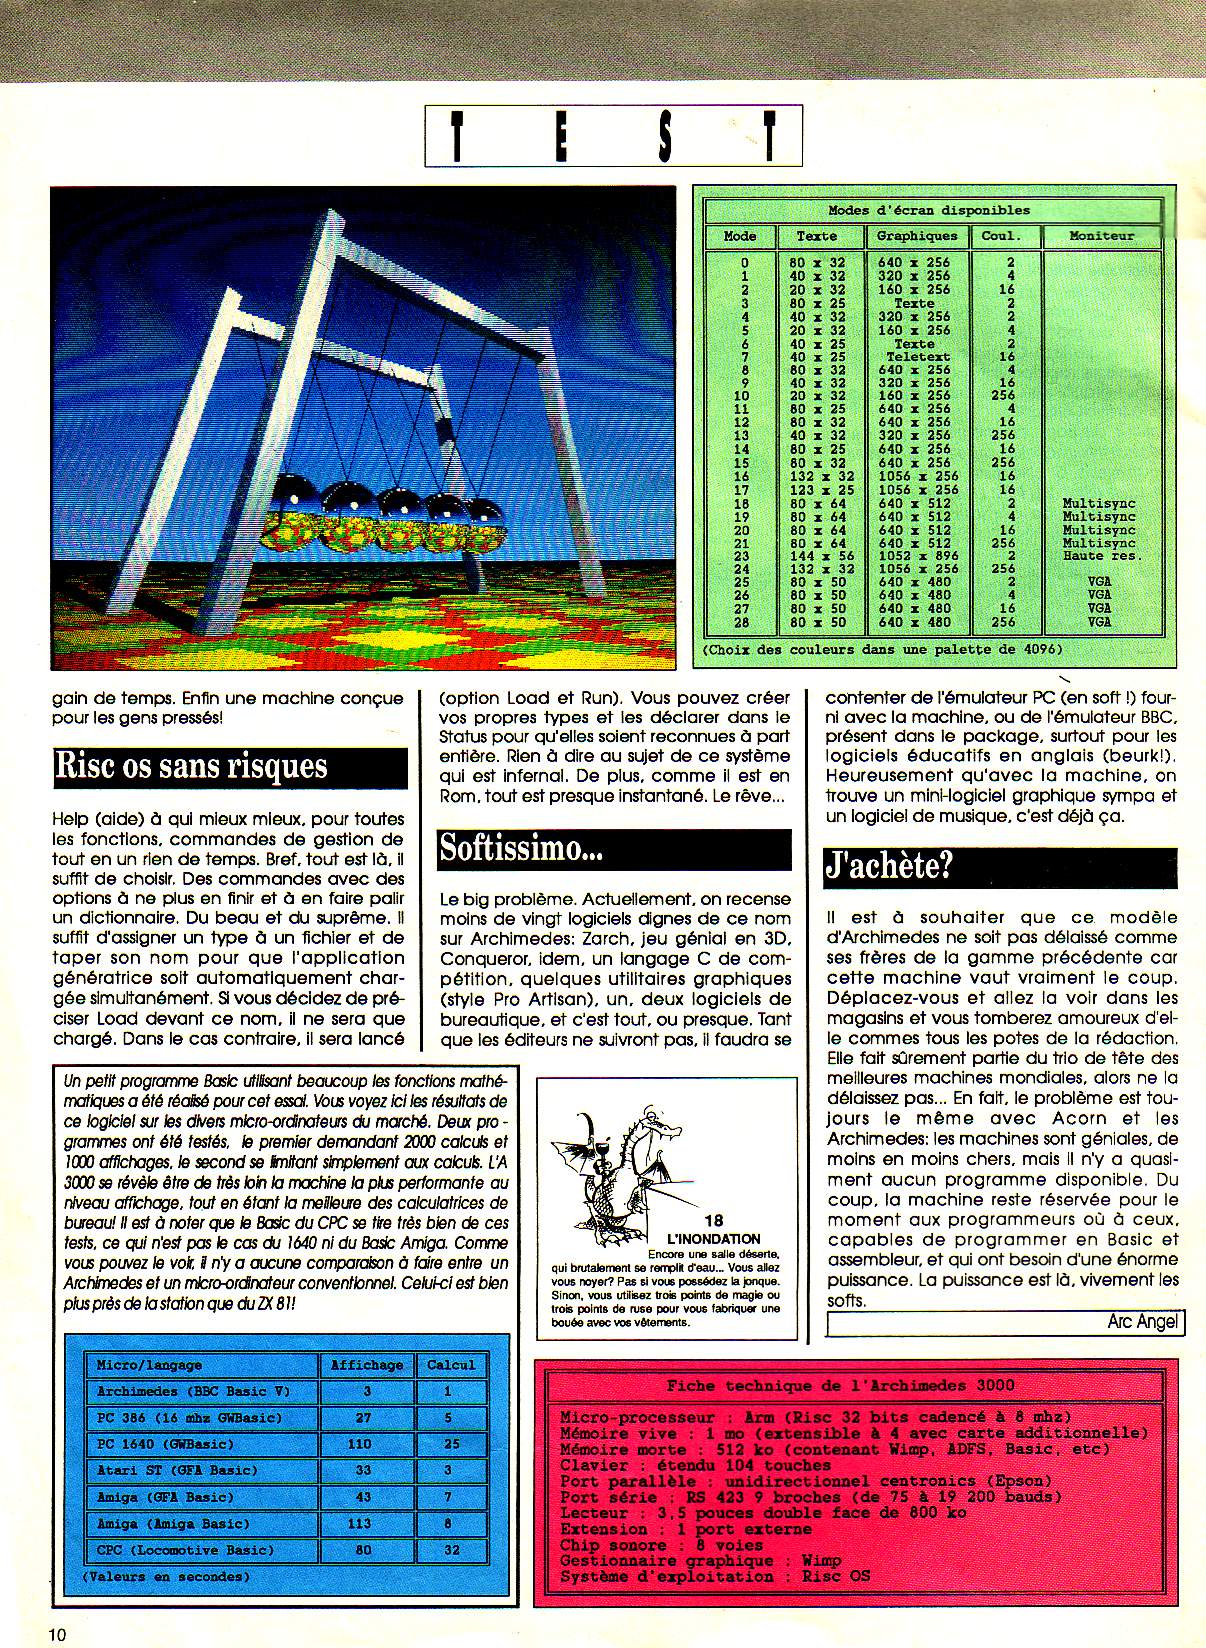 Acorn archimedes 3010 - Page 30 Micromag4-08